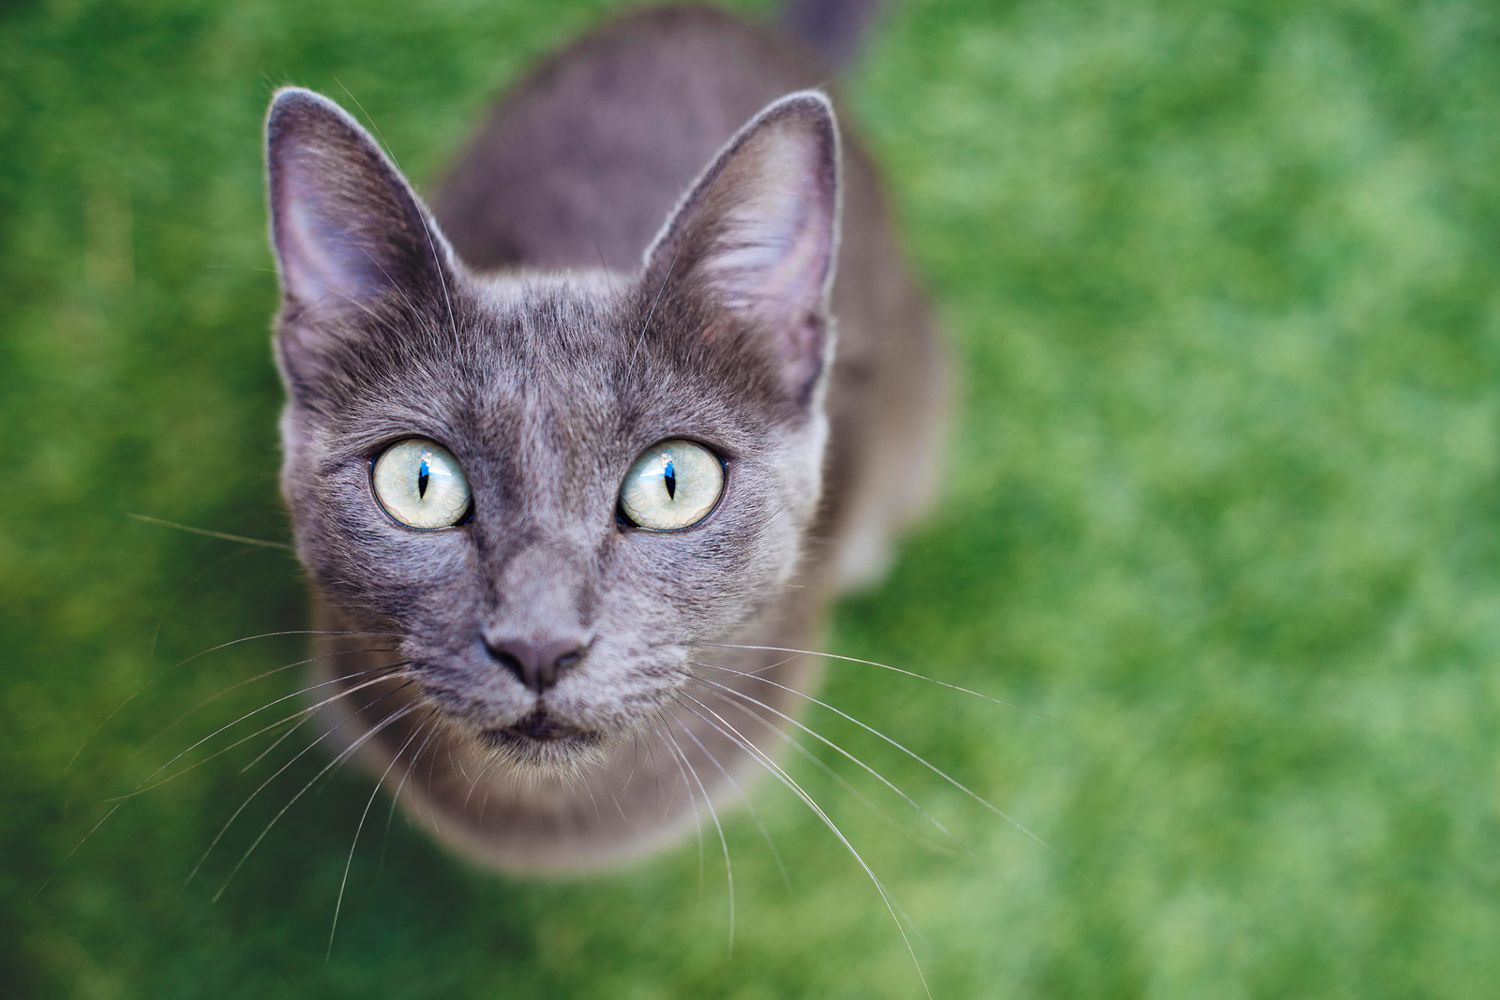 How to Spot, Treat, & Prevent Heartworm in Cats